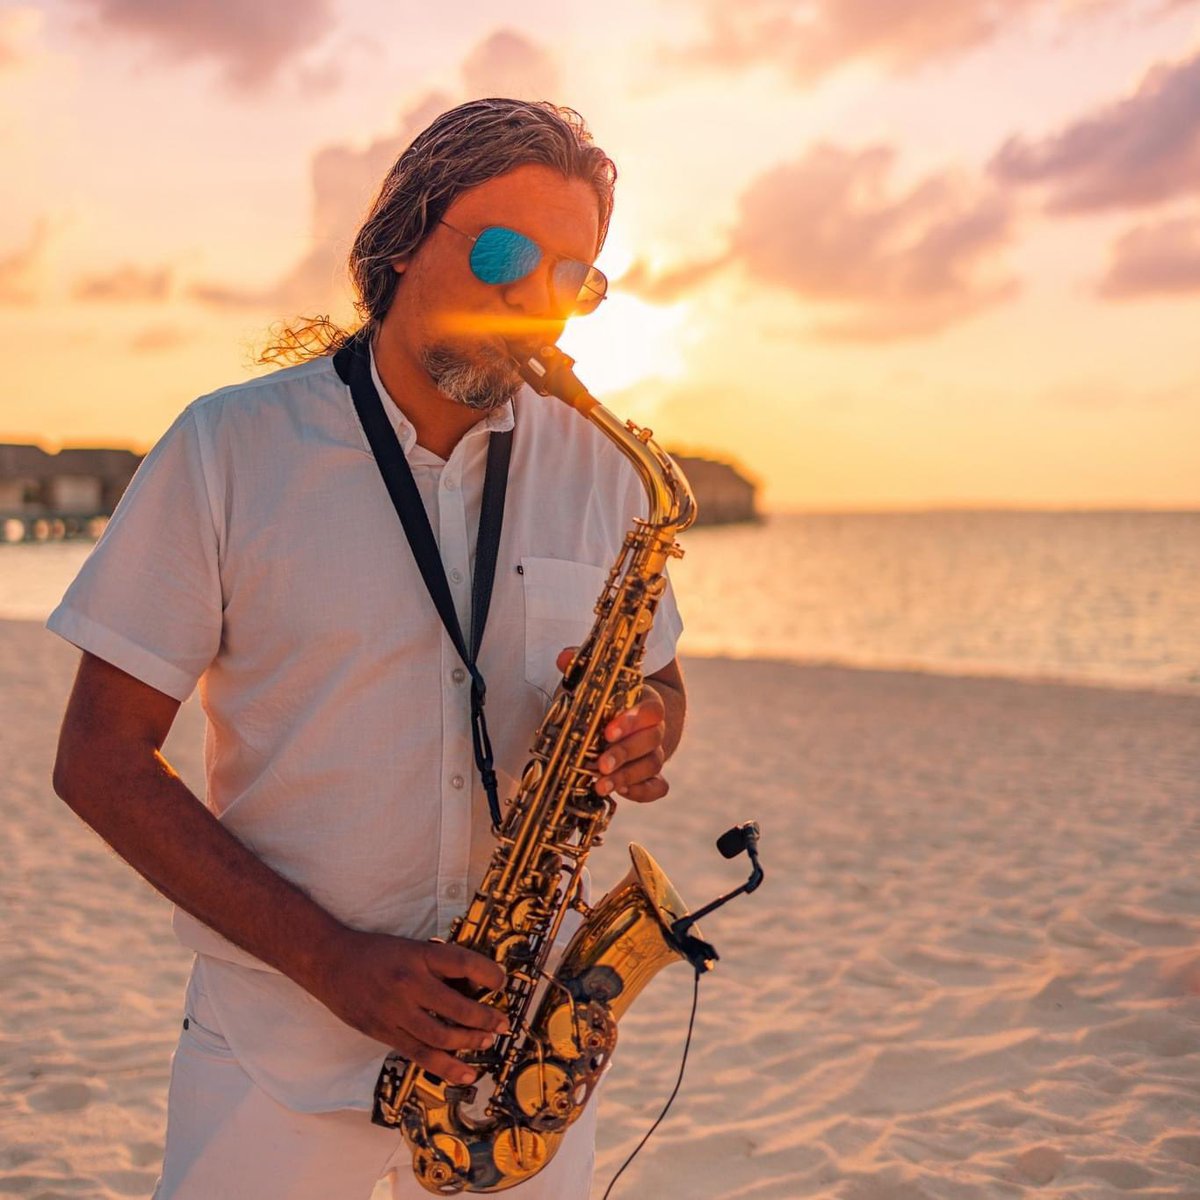 The world swings to the beat of jazz today!  This #WorldJazzDay, immerse yourself in the soulful melodies and electrifying improvisations.

What are your favourite jazz classics? Share your playlist and let's celebrate together! 

#luxsouthariatoll #LiveMusic #IslandParadise